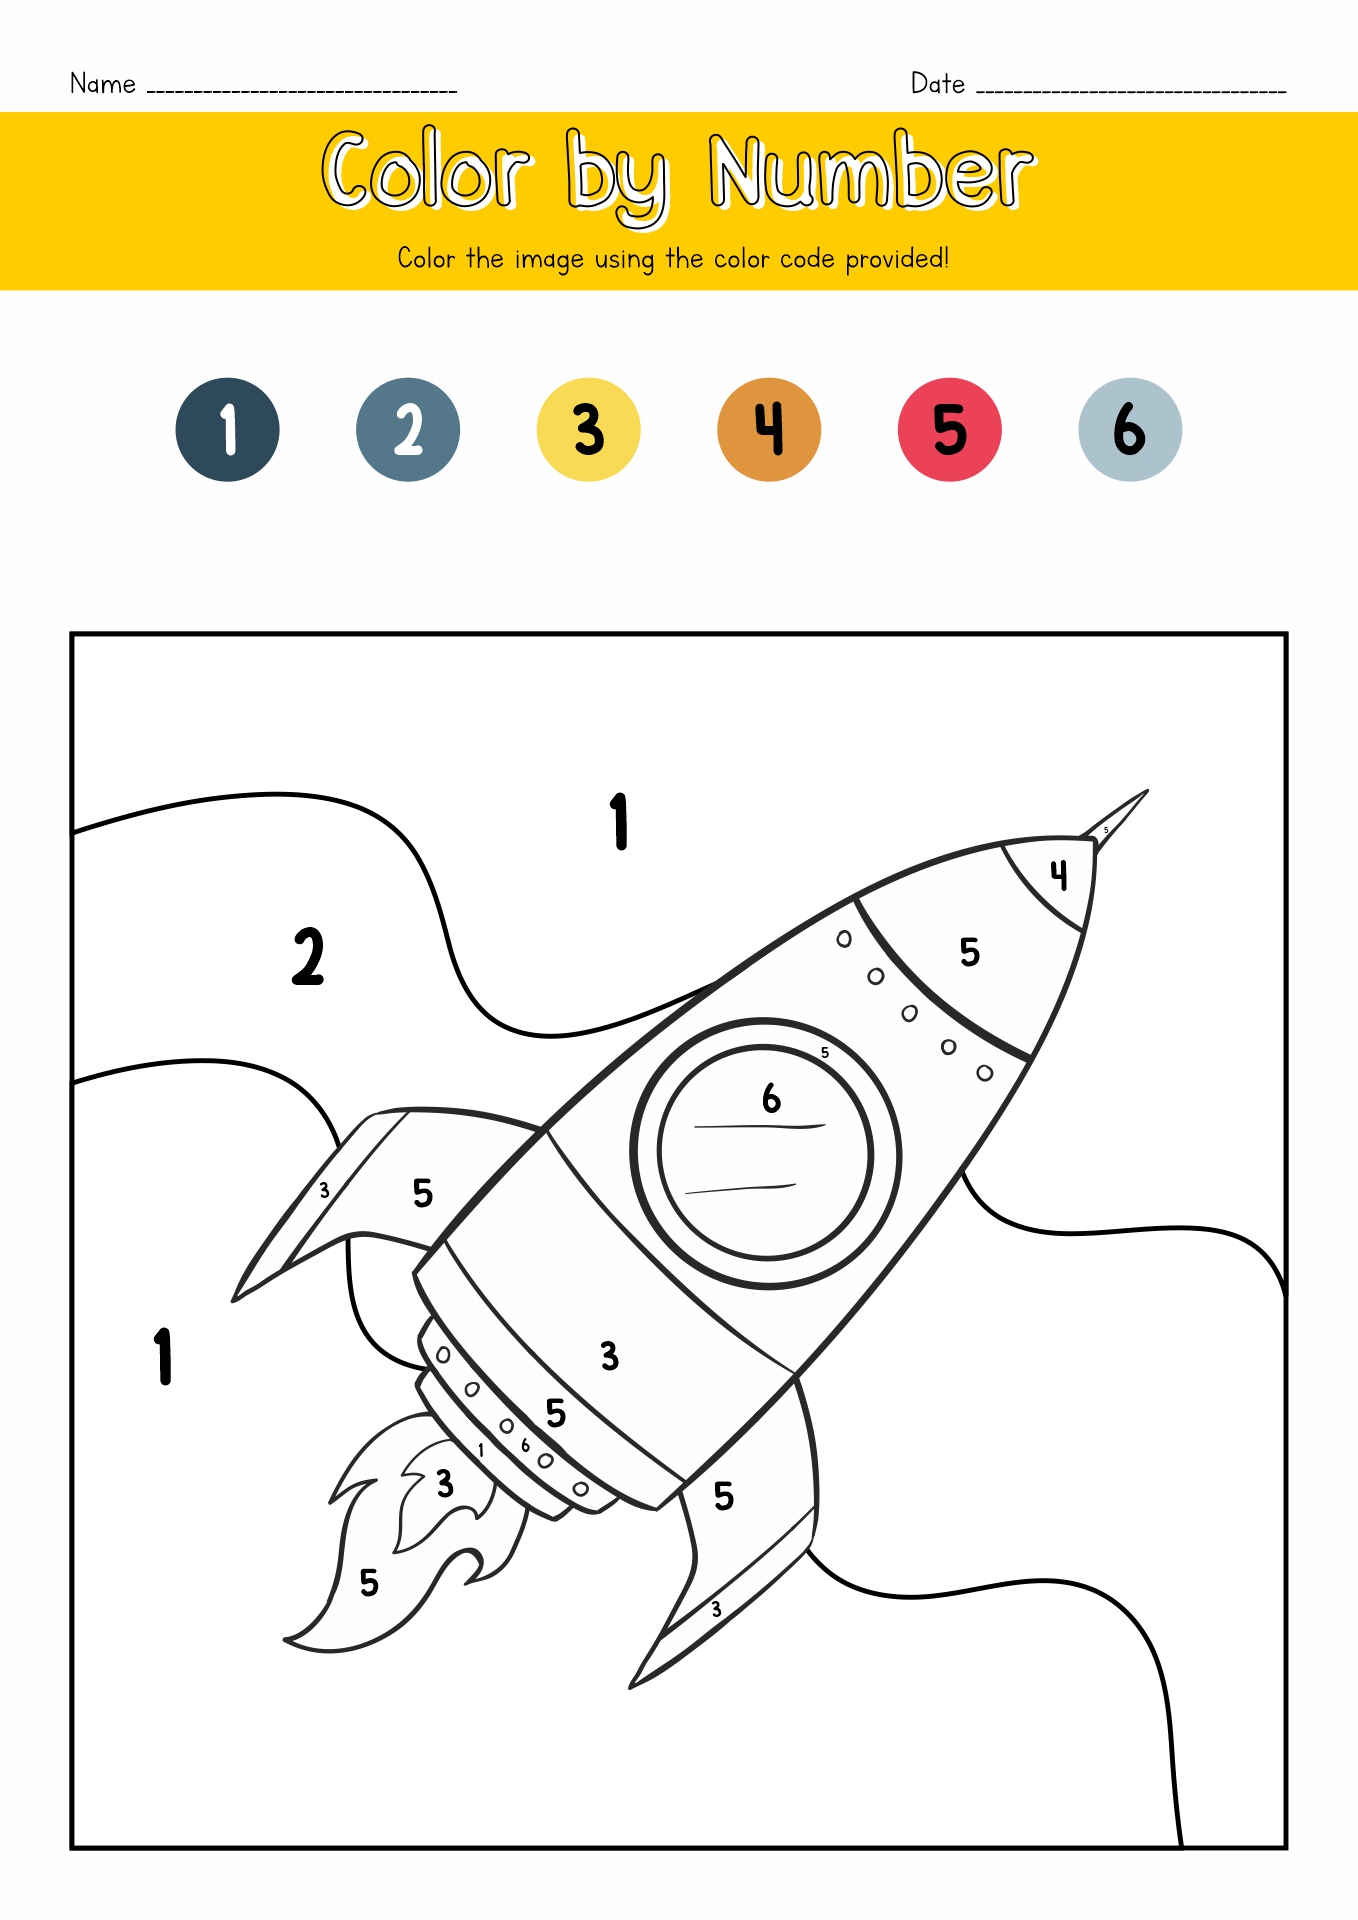 Space Color by Number Coloring Pages Image